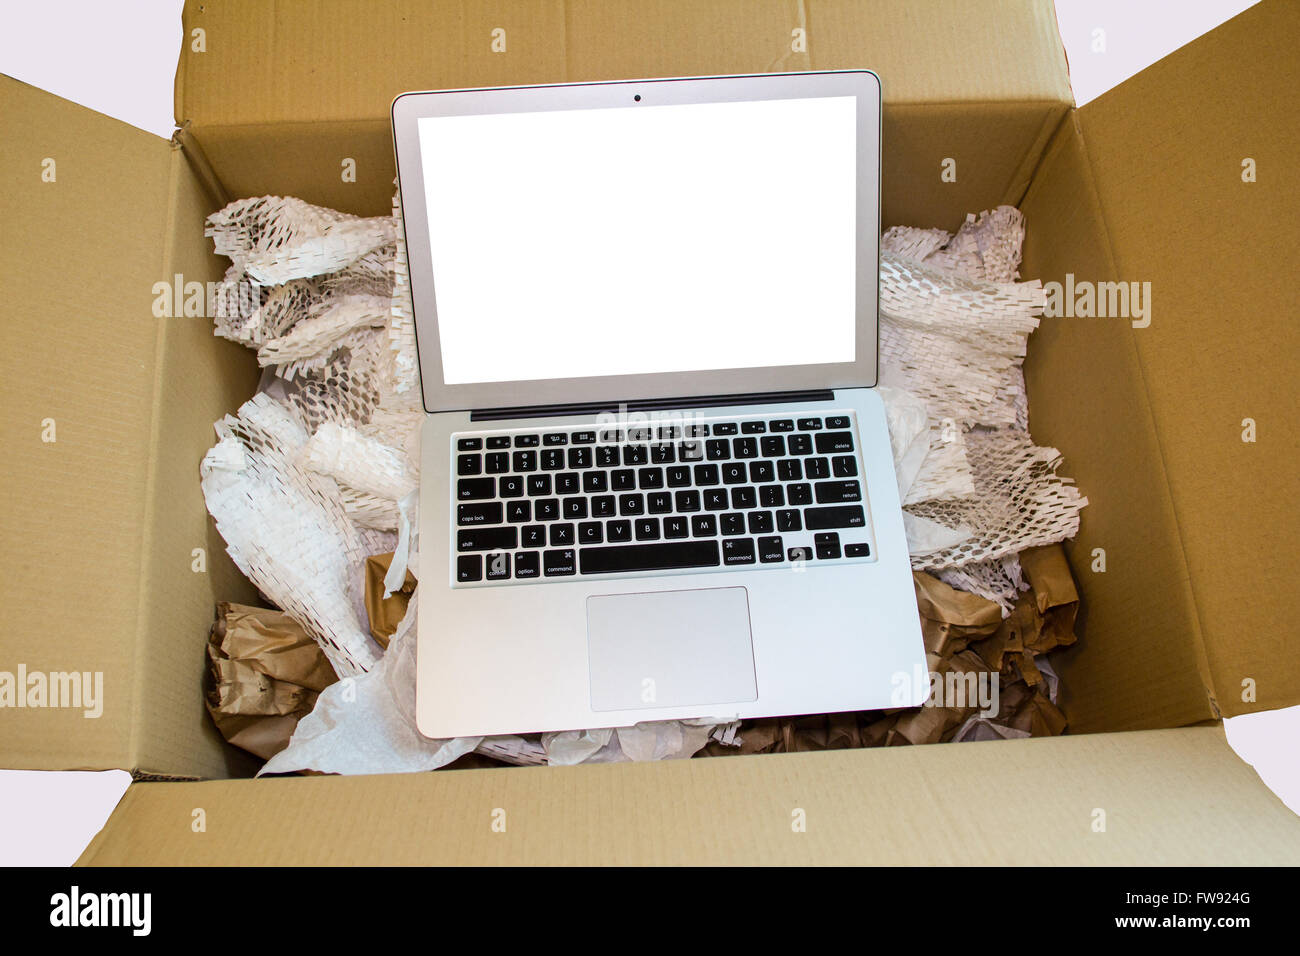 Shopping and unboxing new laptop computer Stock Photo - Alamy